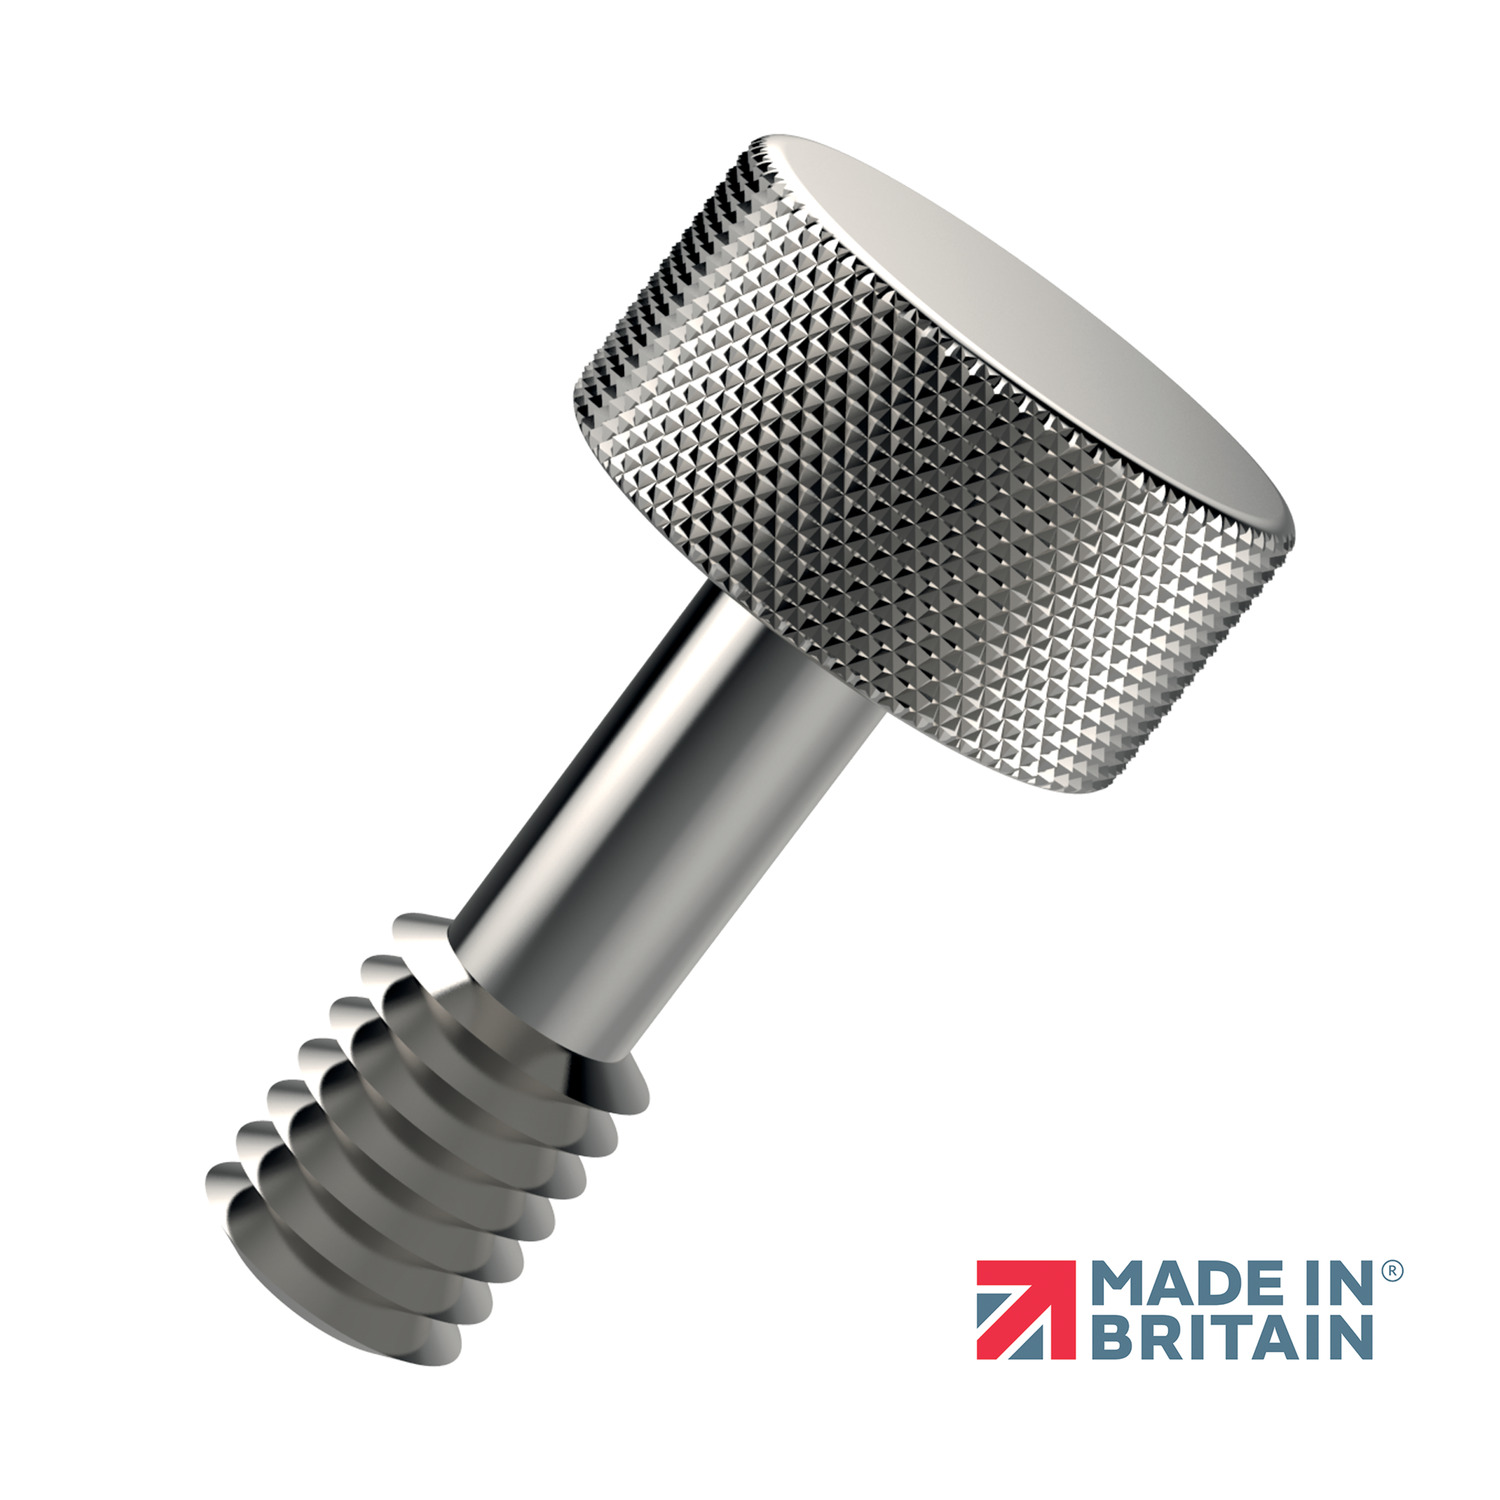 Captive Thumb Screws This captive thumb screw comes in sizes M3 to M6 and can be used in conjunction with our captive washers (36691) or retaining flanges (36692). Other materials available on request.